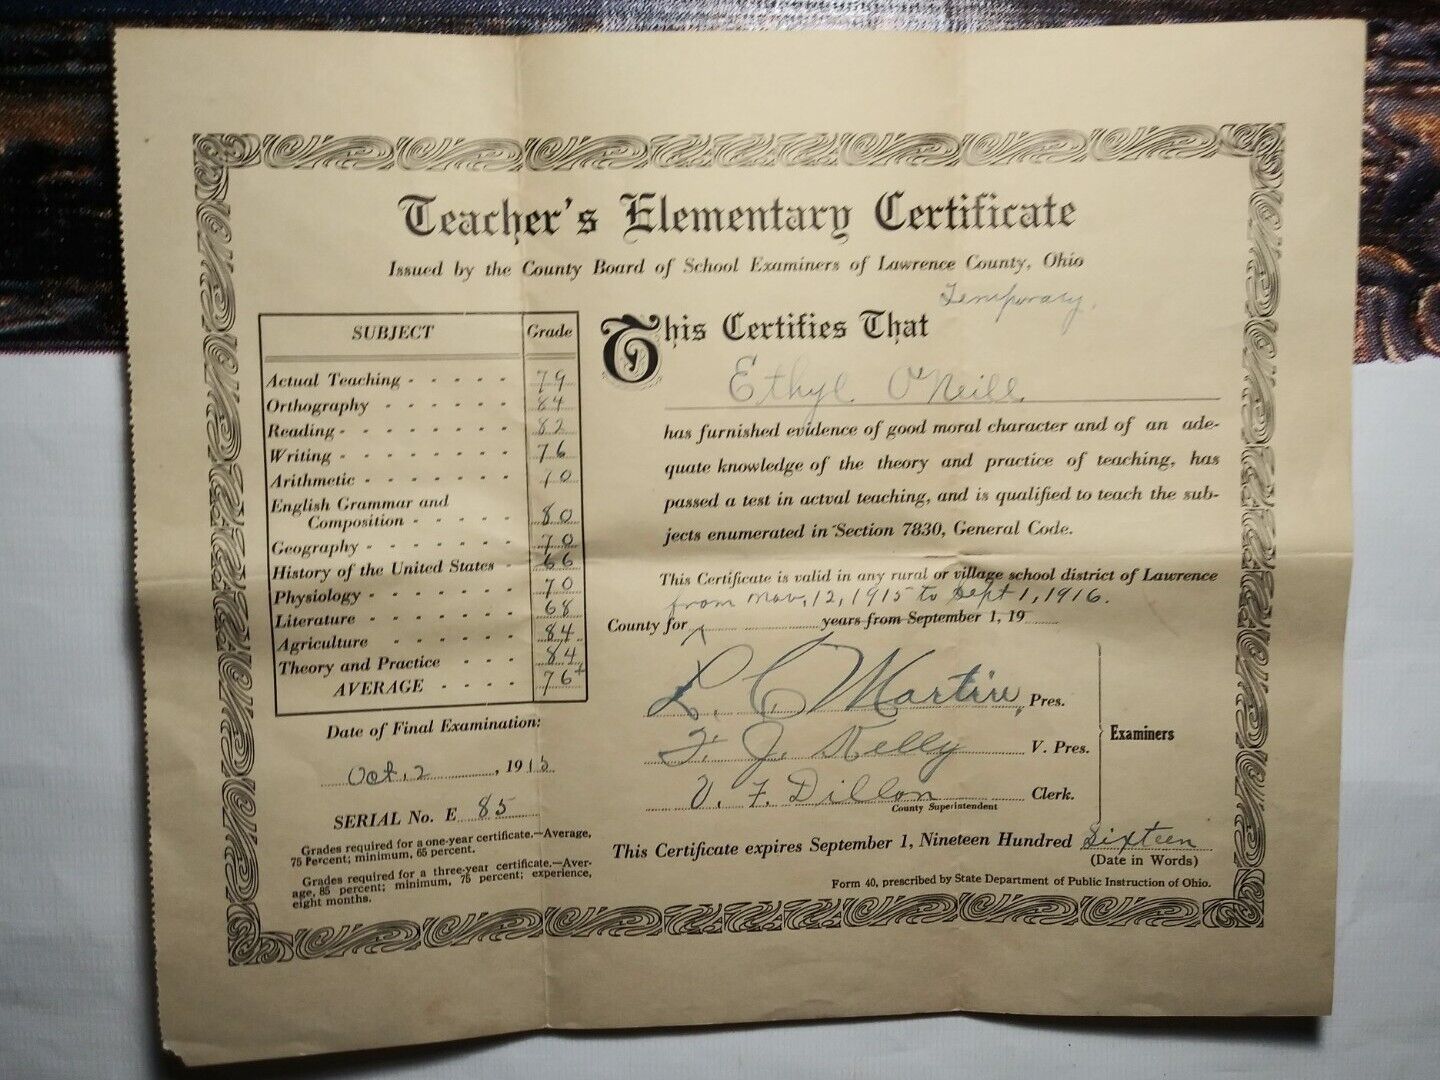 Antique 1915 Teacher's Elementary Temporary Certificate Lawrence County OH.